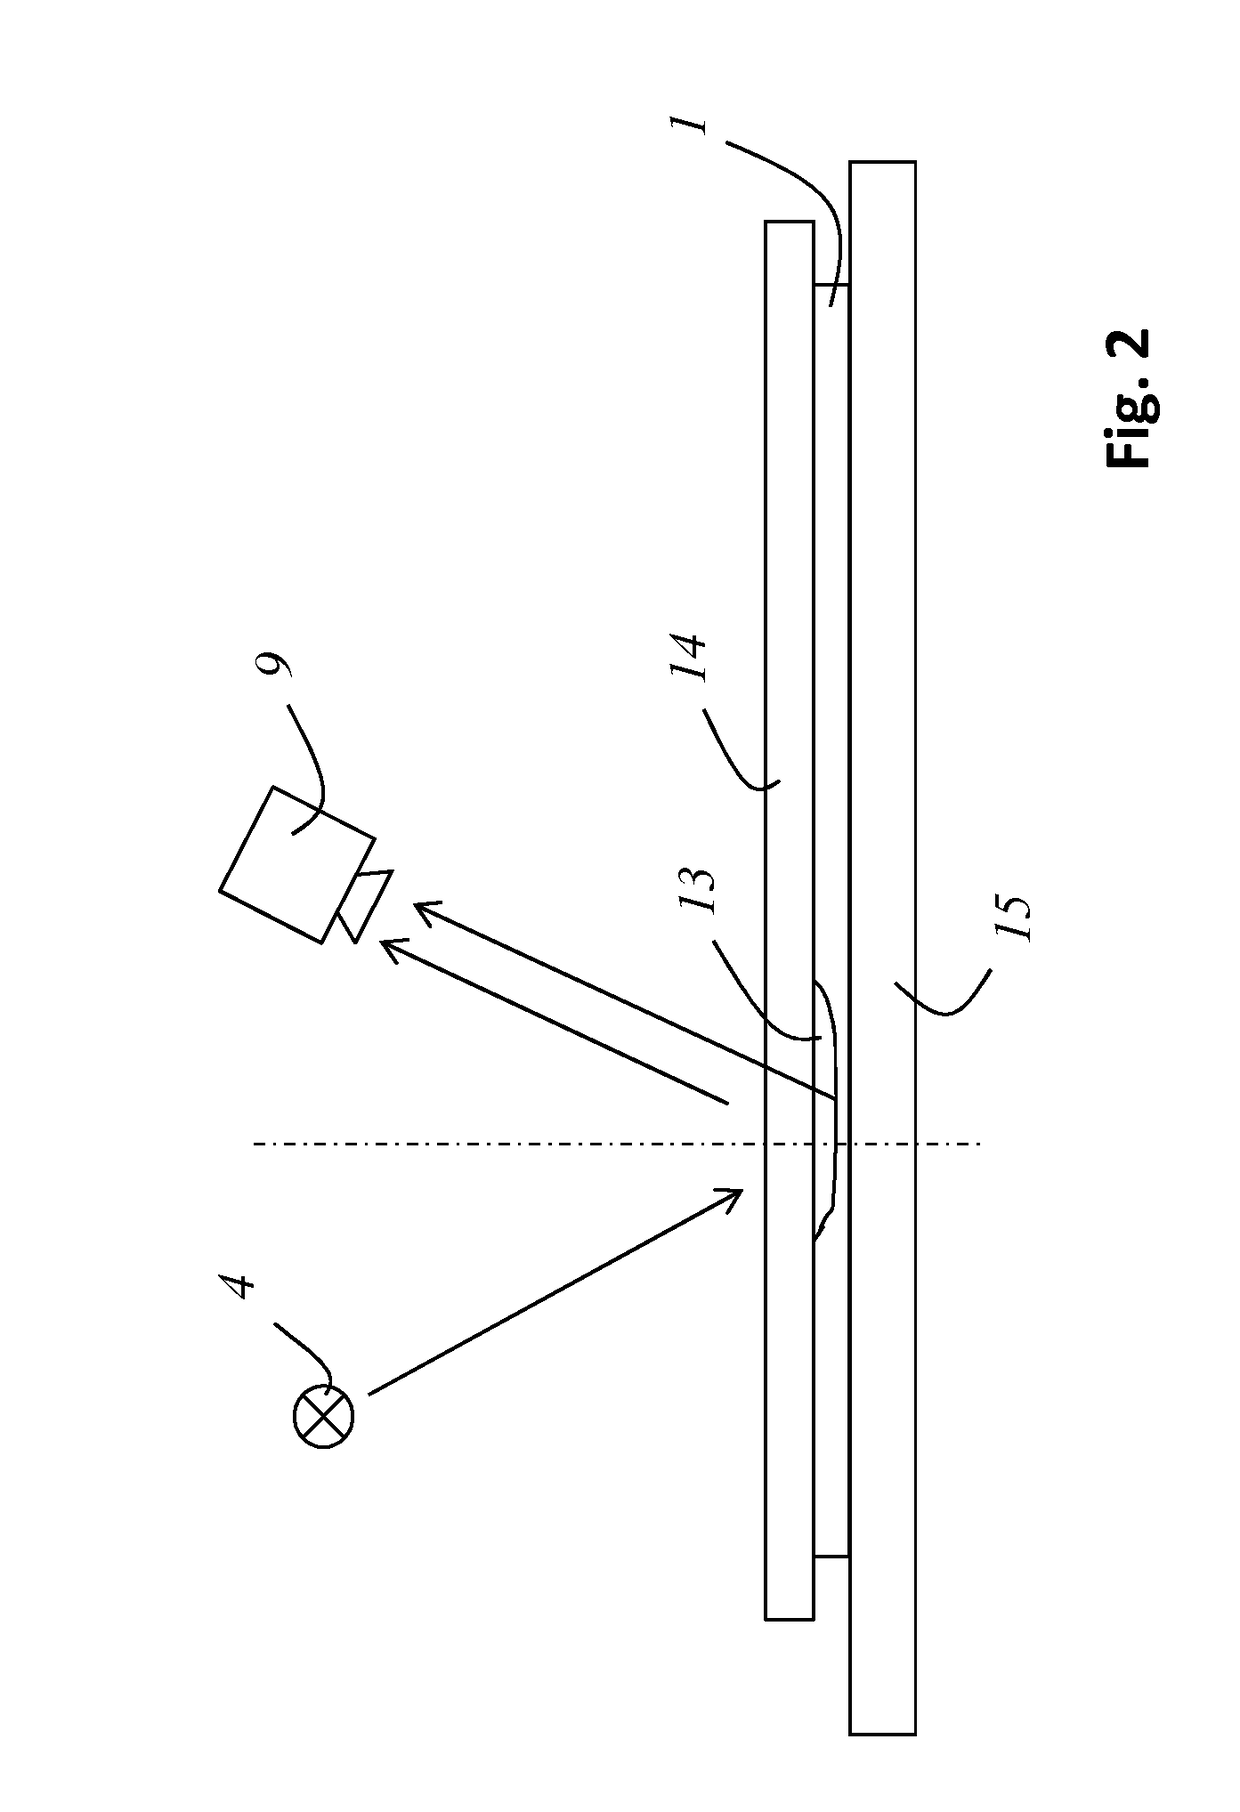 Method in the preparation of samples for microscopic examination and for checking coverslipping quality